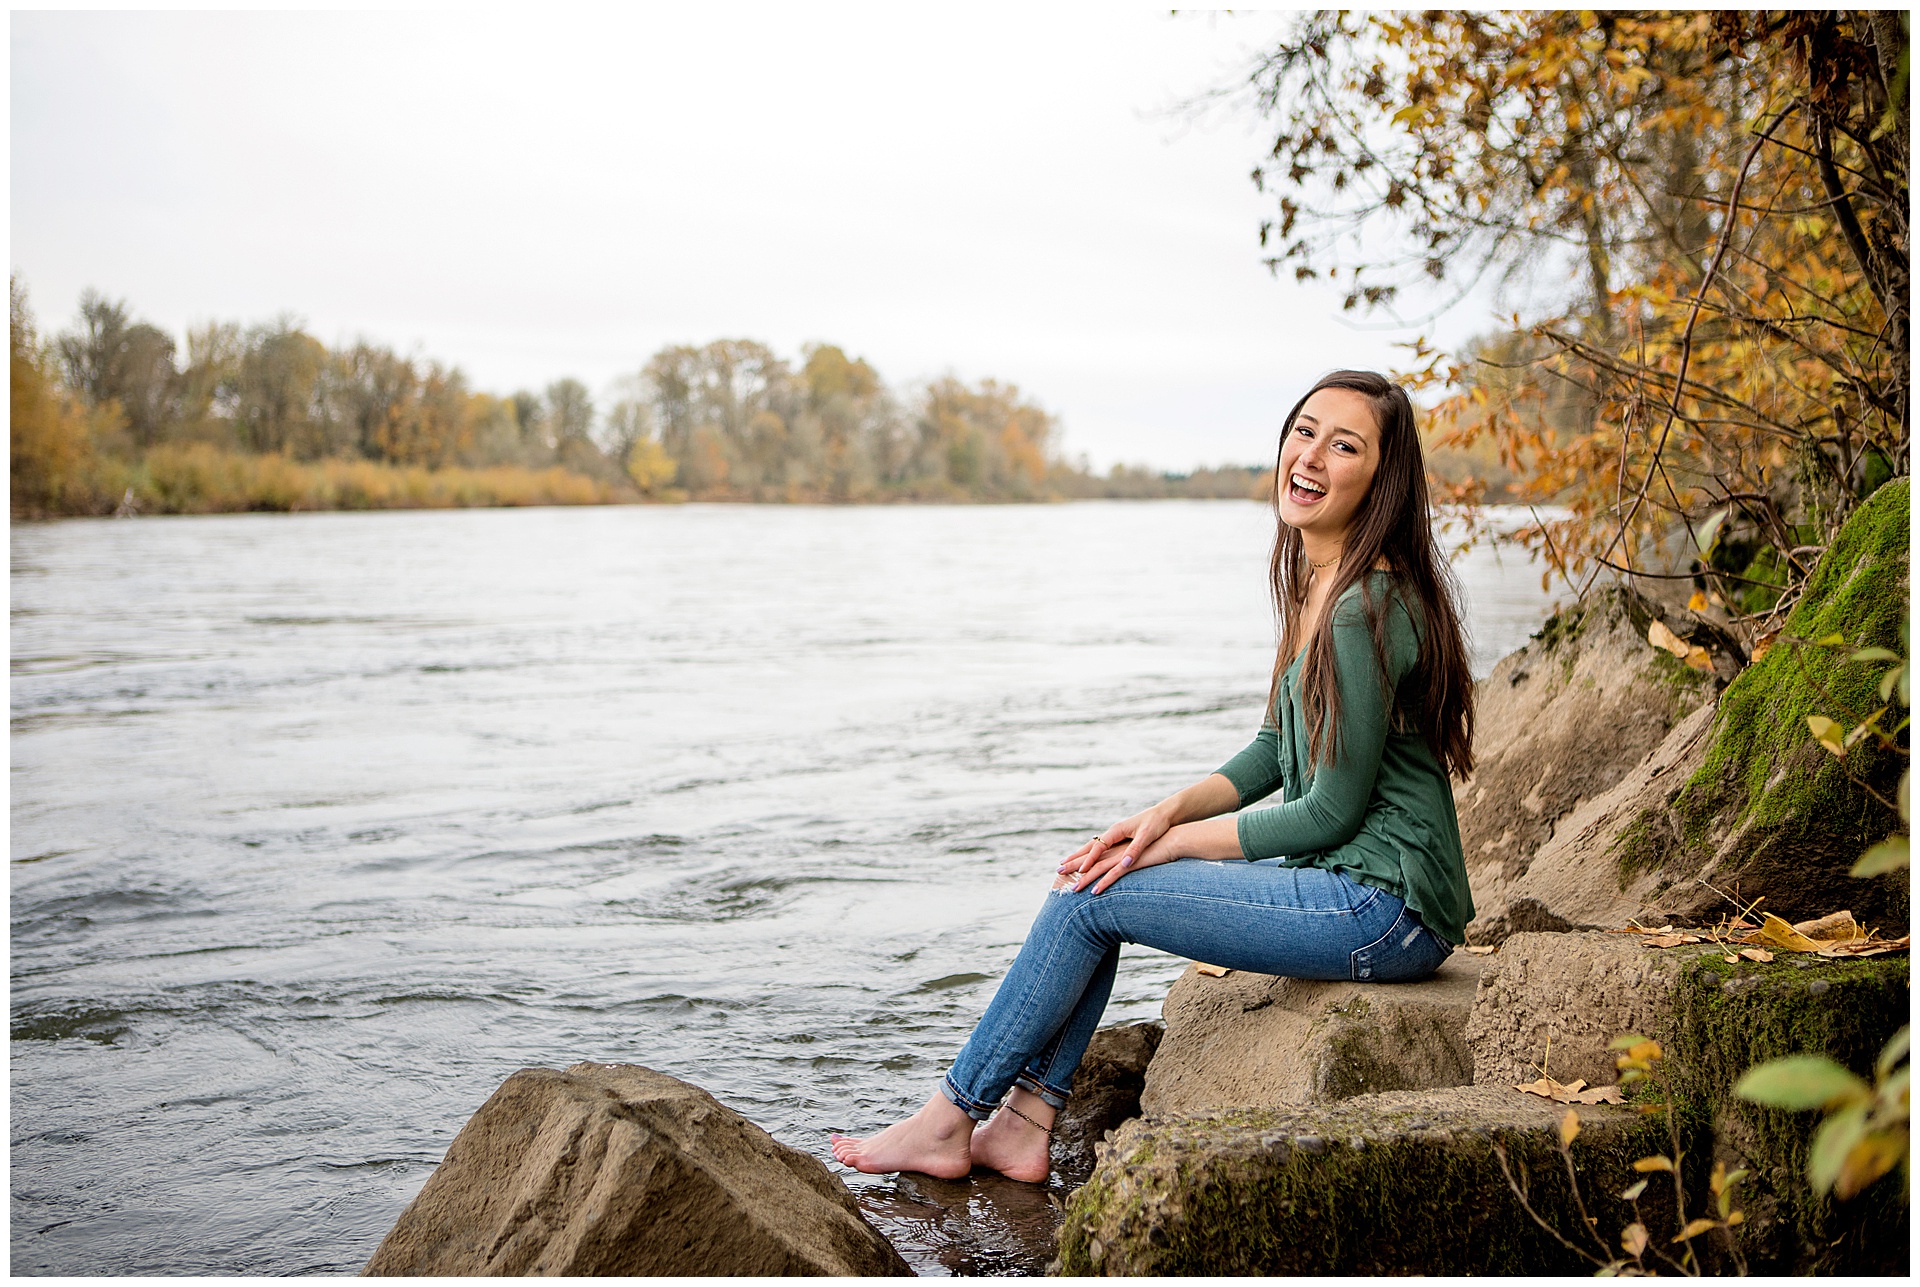 Senior pictures in Gig Harbor Washington by Alison Smith photographer